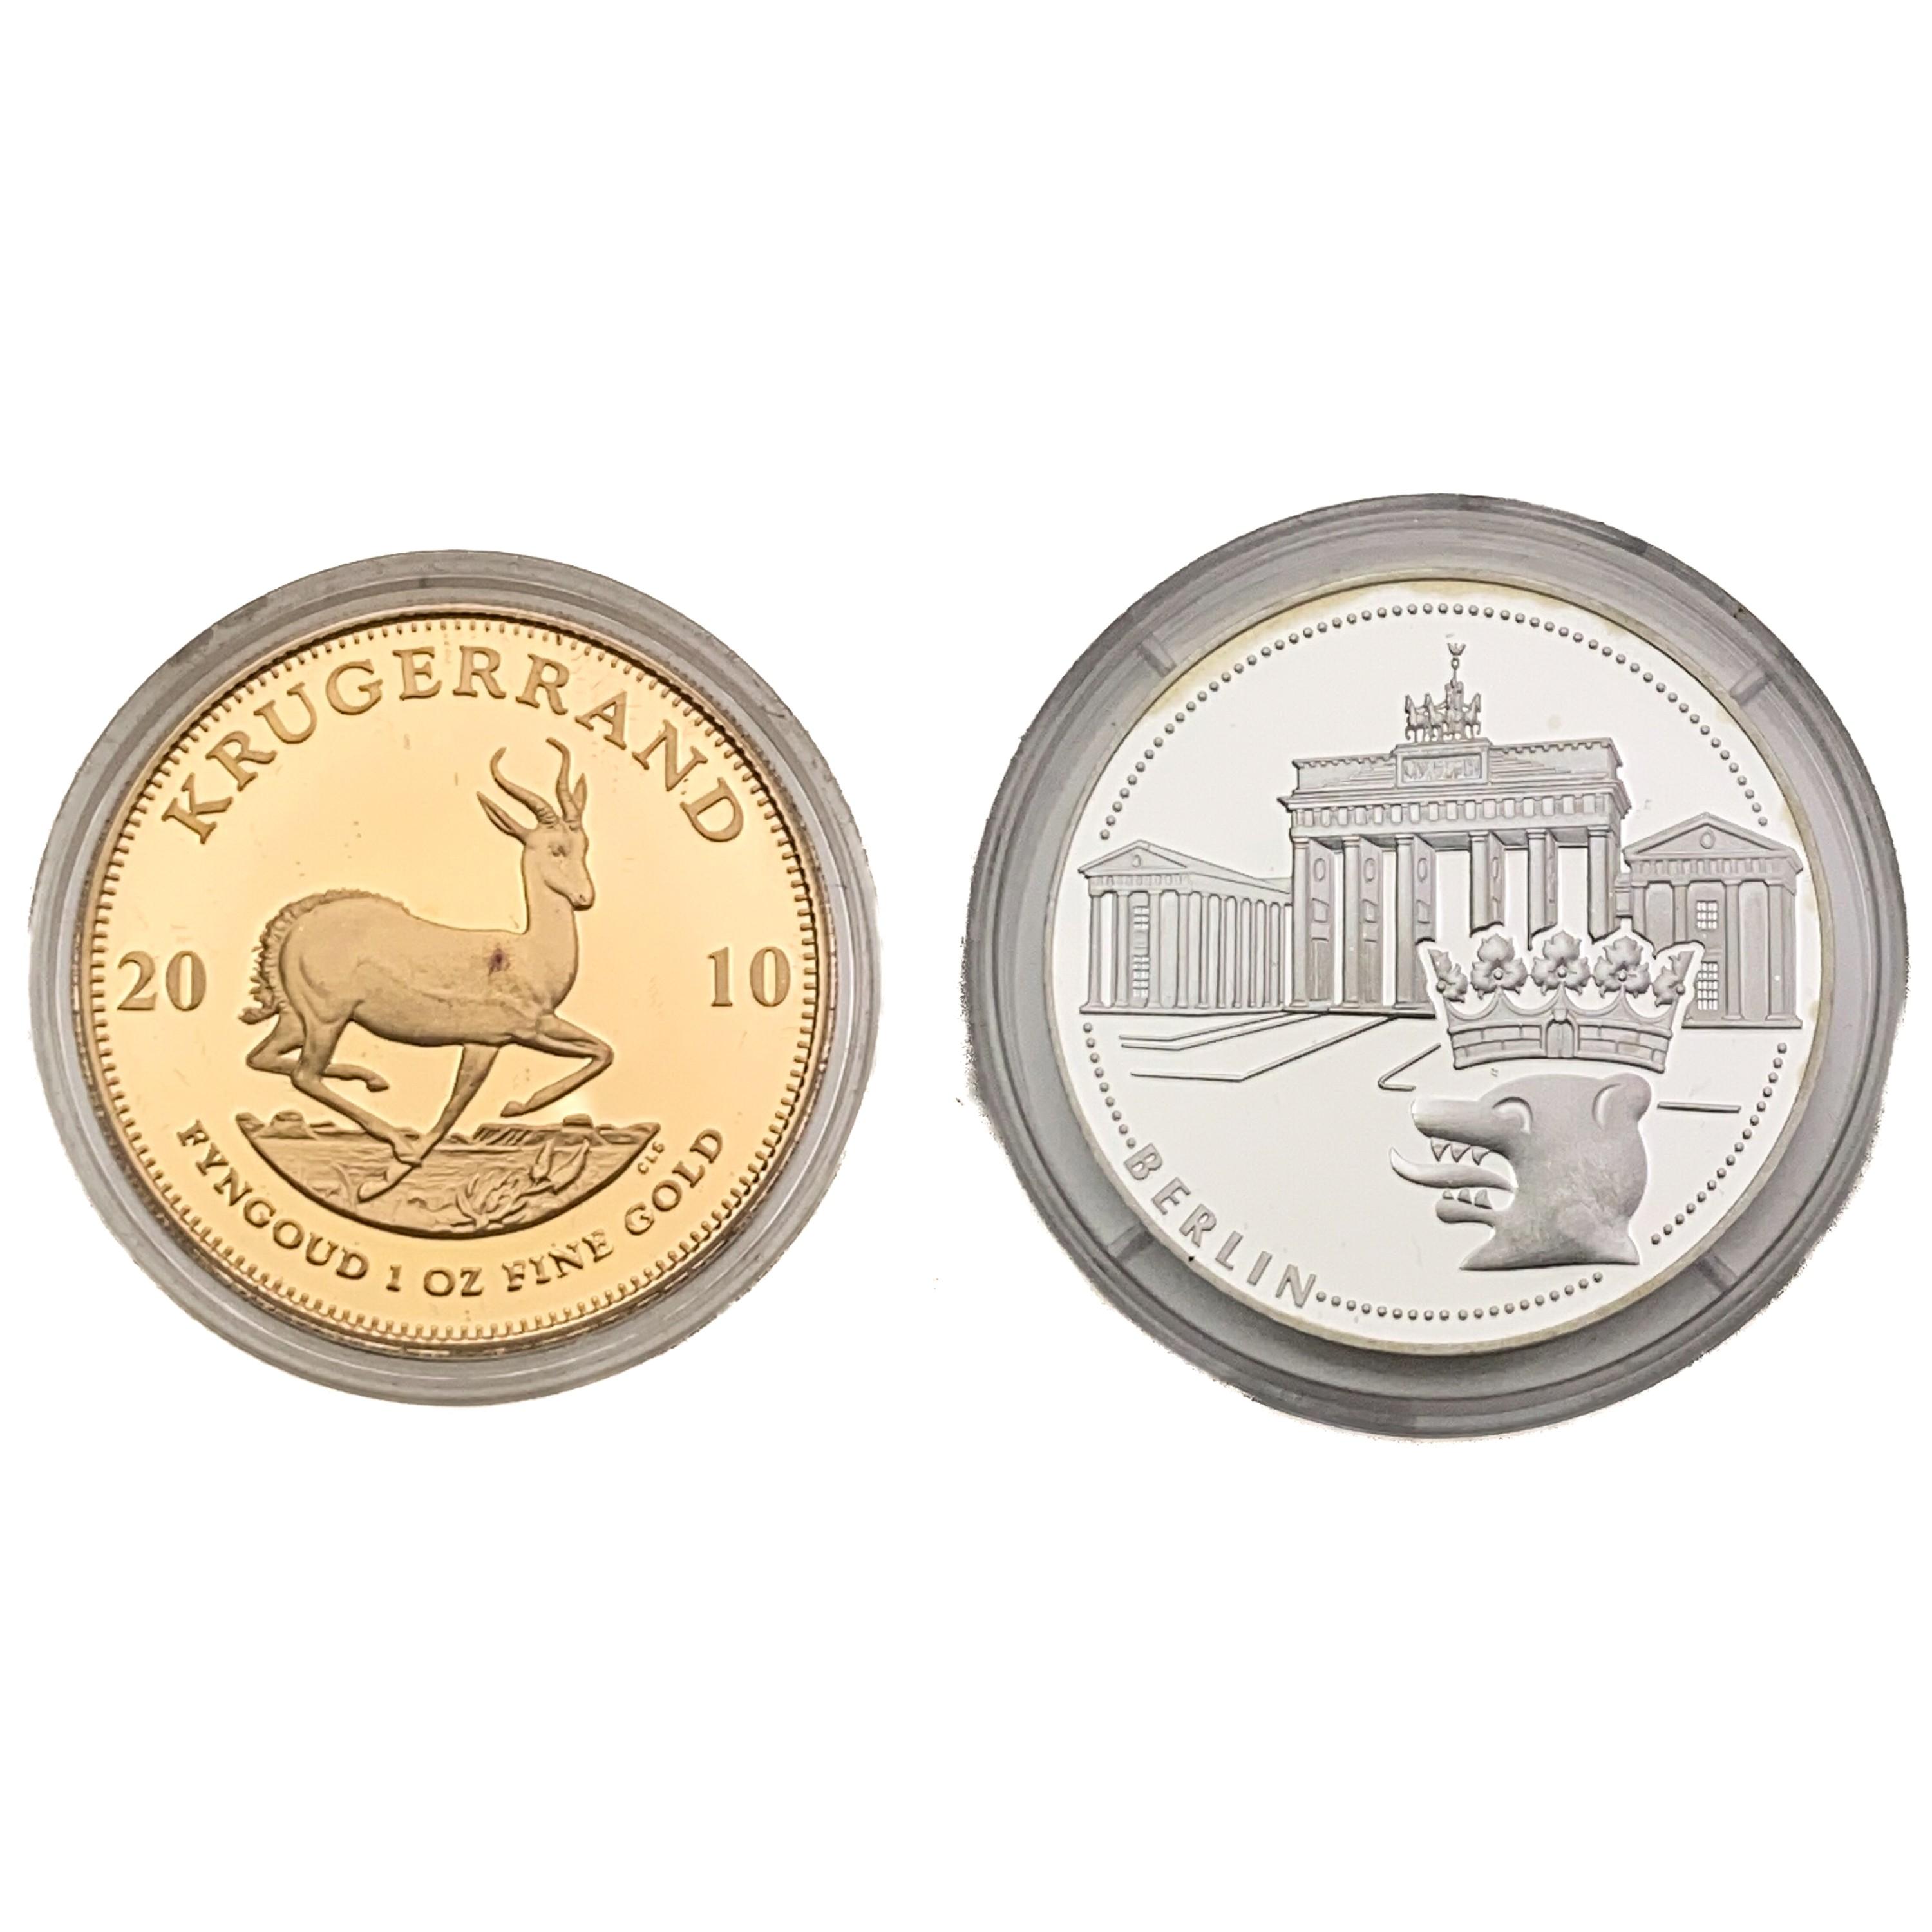 2010 Berlin Krugerrand 1oz Gold and Silver Launch